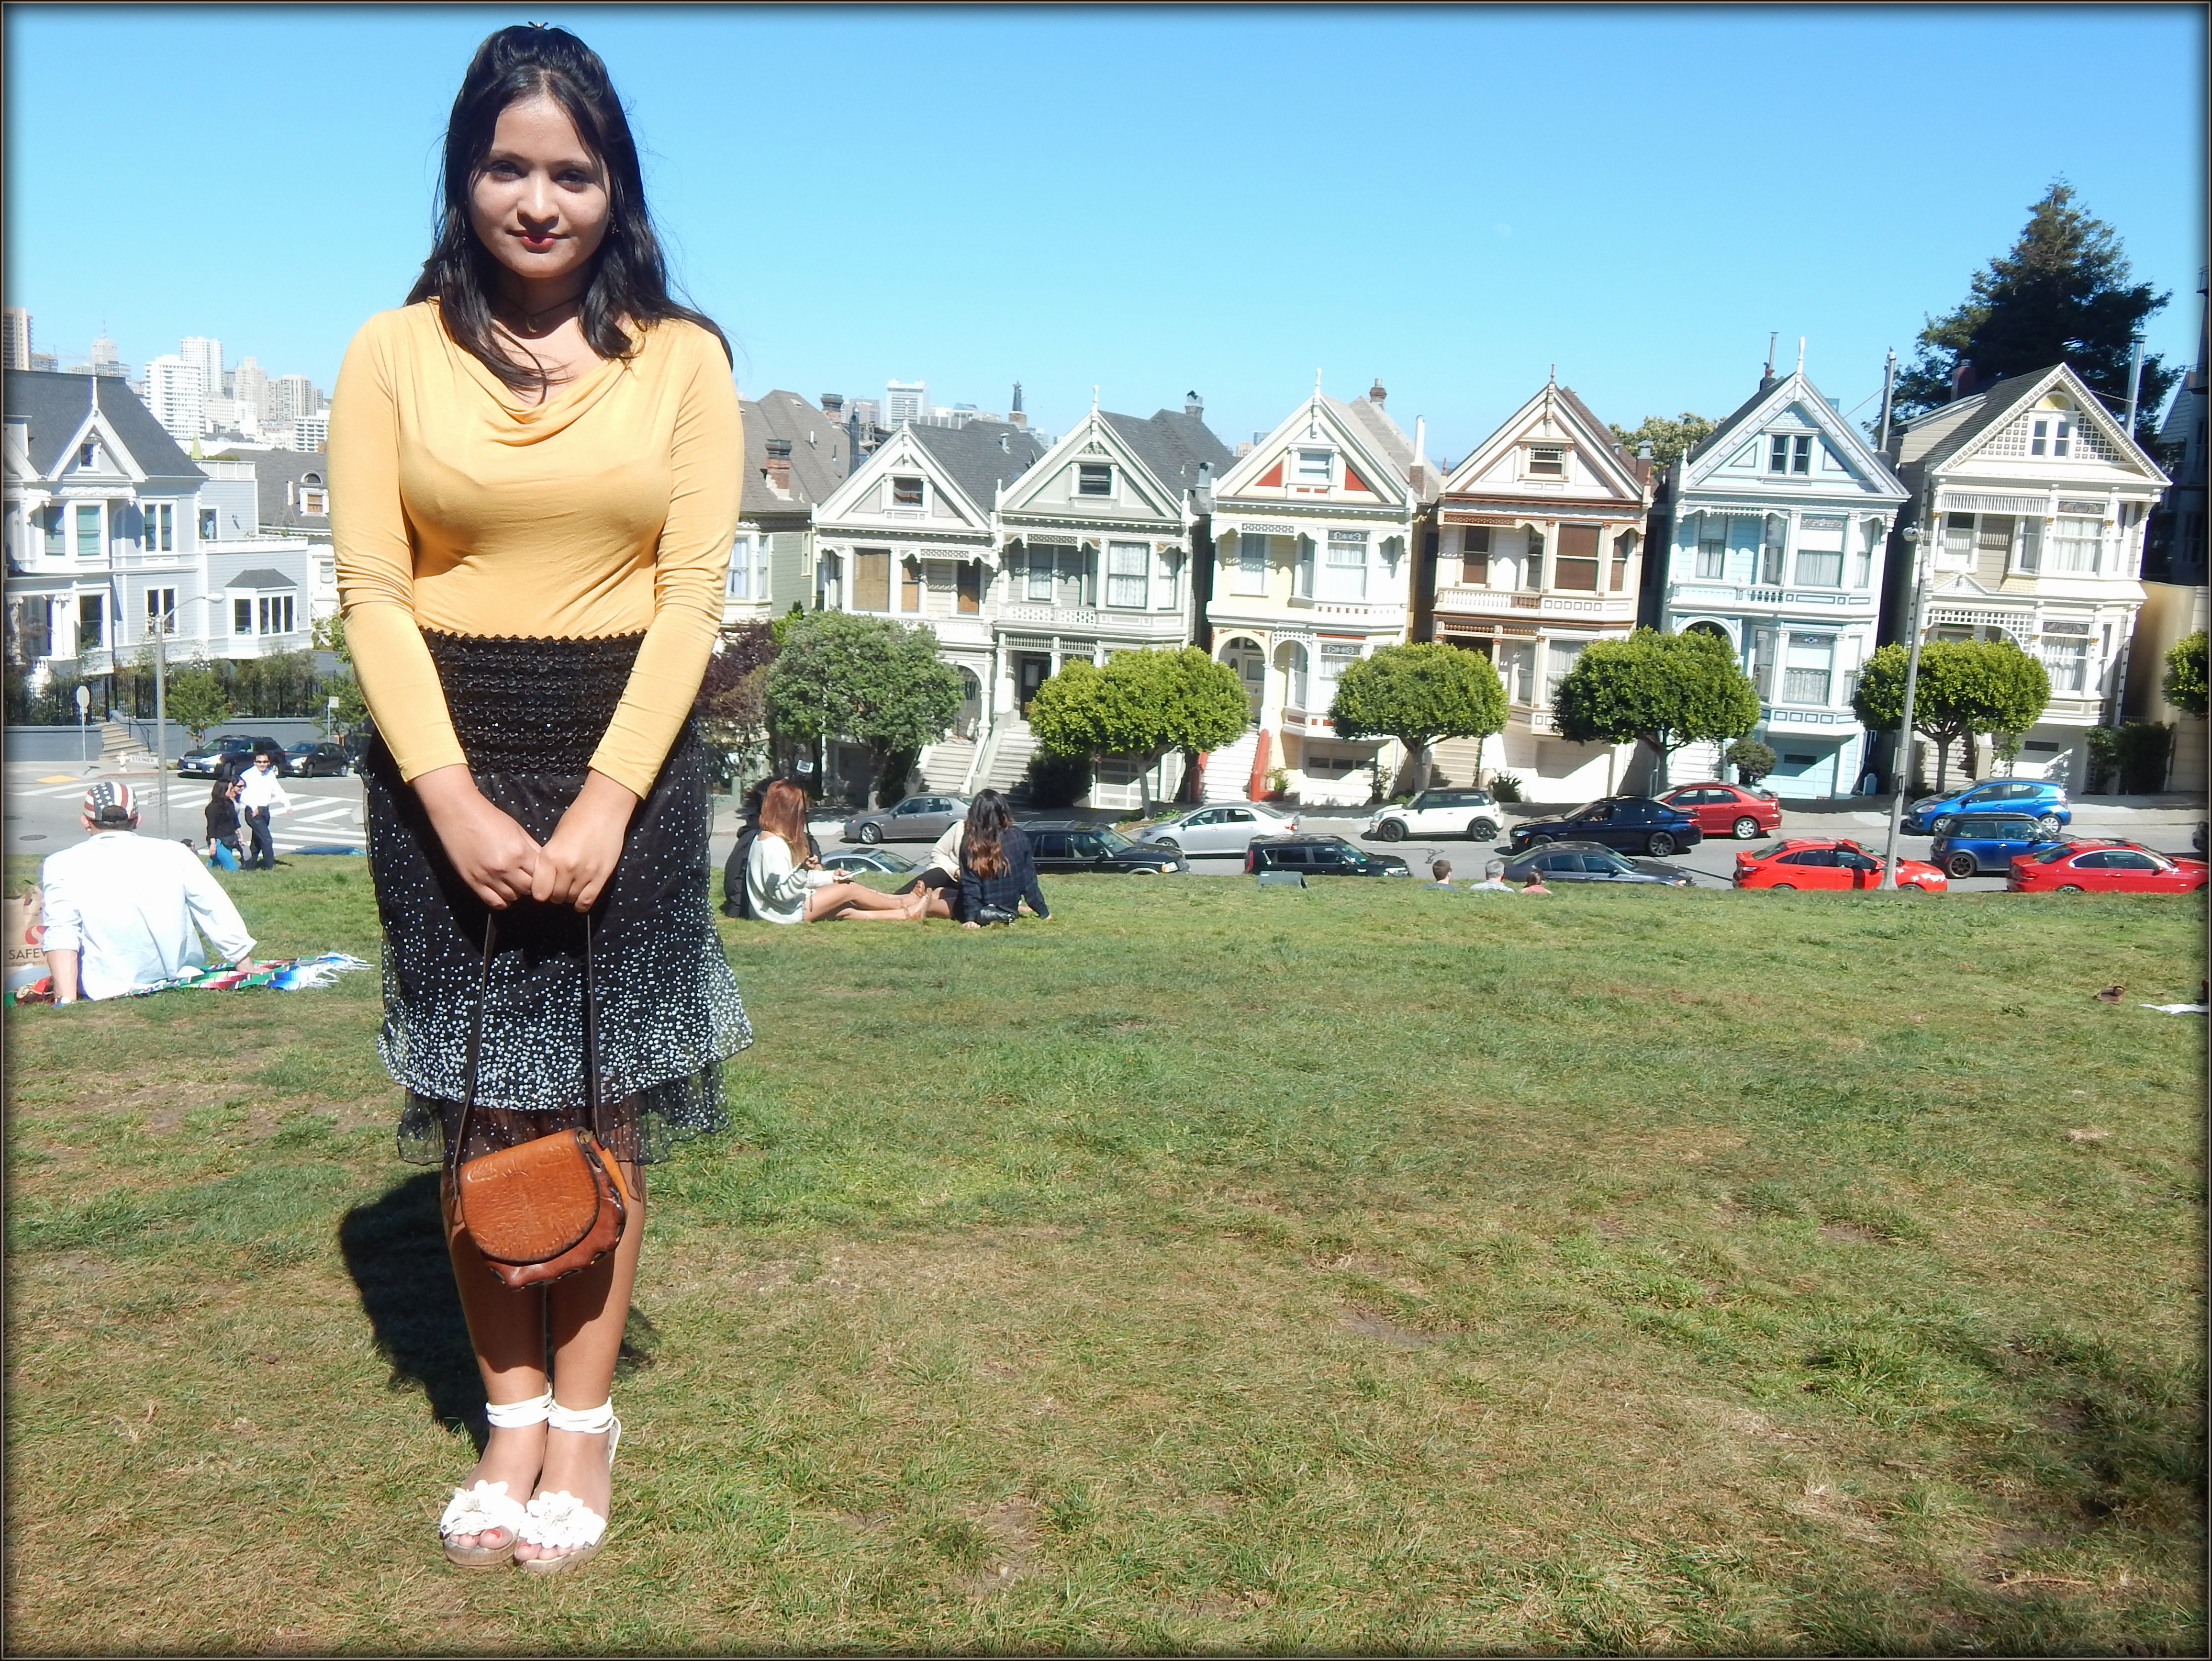 Painted Ladies in background :D